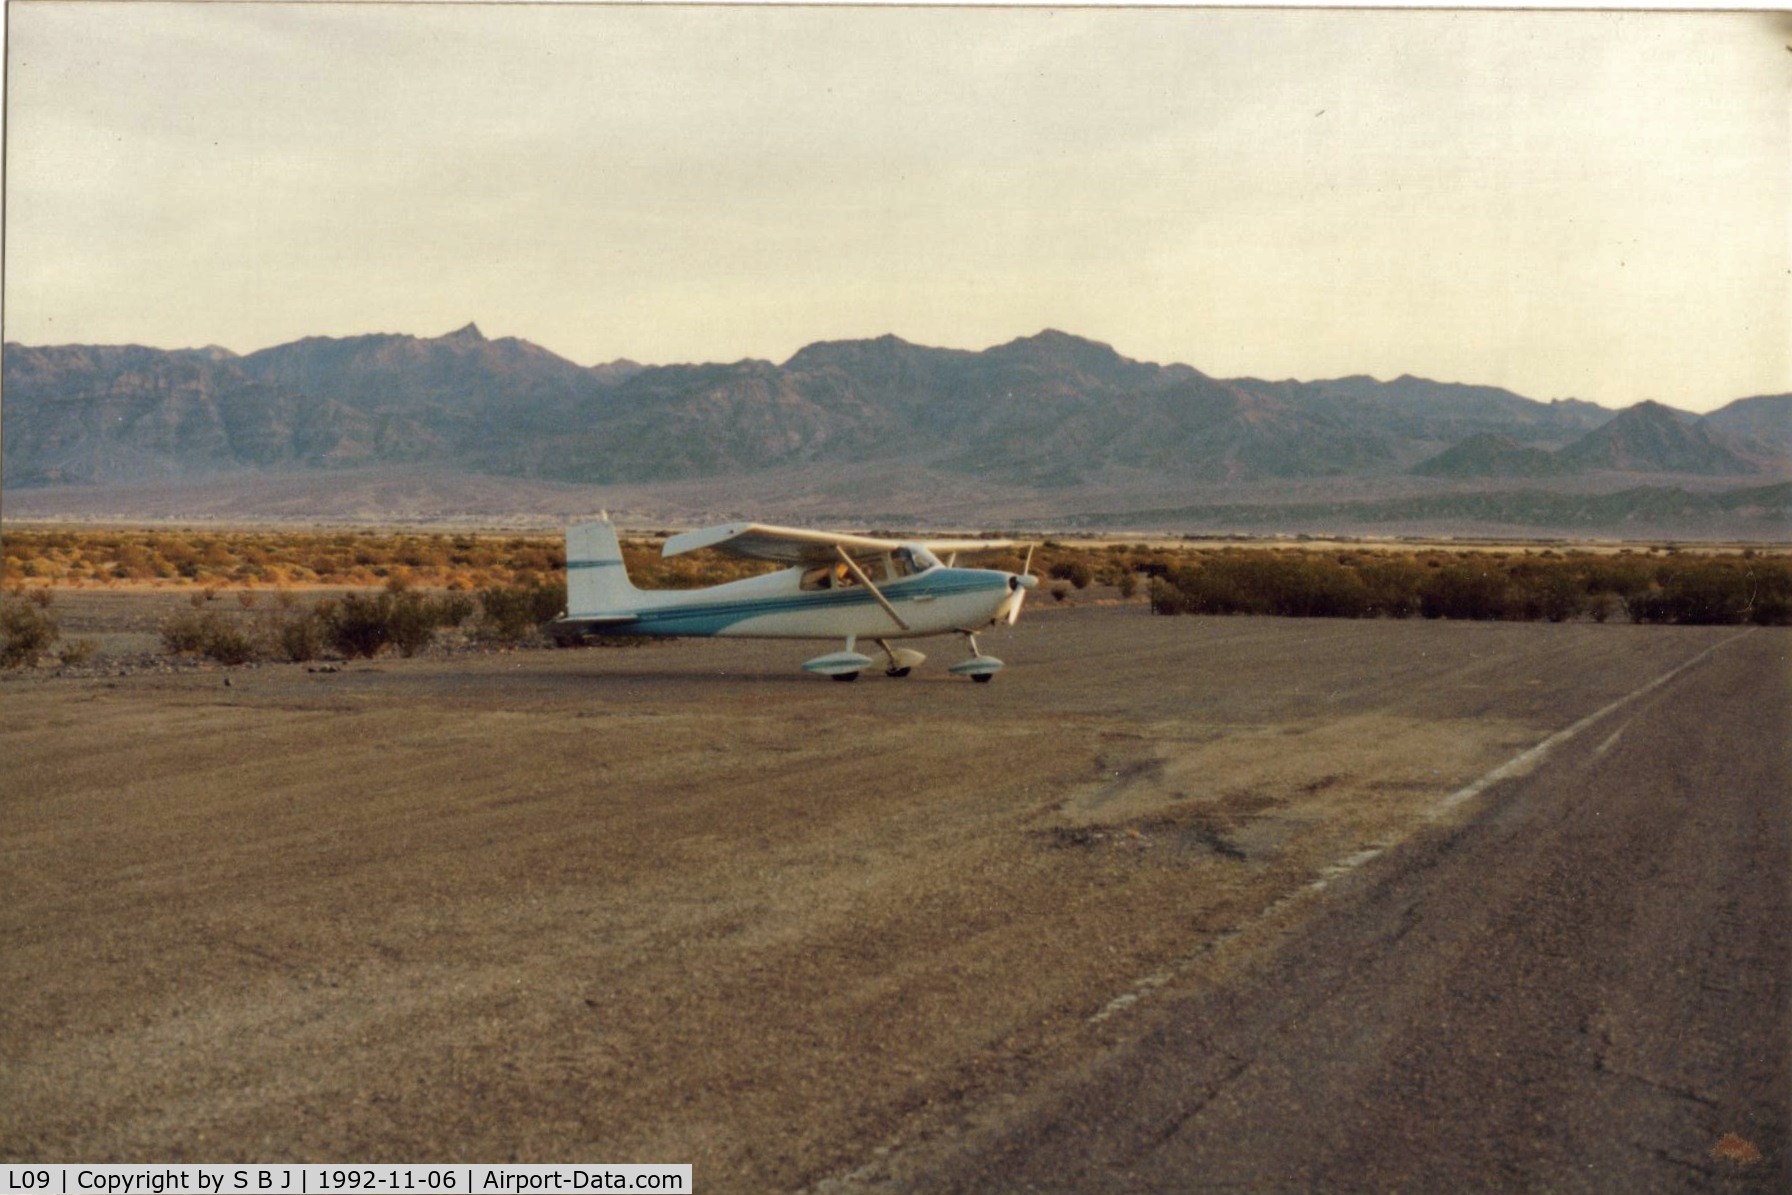 Stovepipe Wells Airport (L09) - 69E at the limited parking area at Stovepipe Wells, but on this day as you can see, it was not overcrowded.